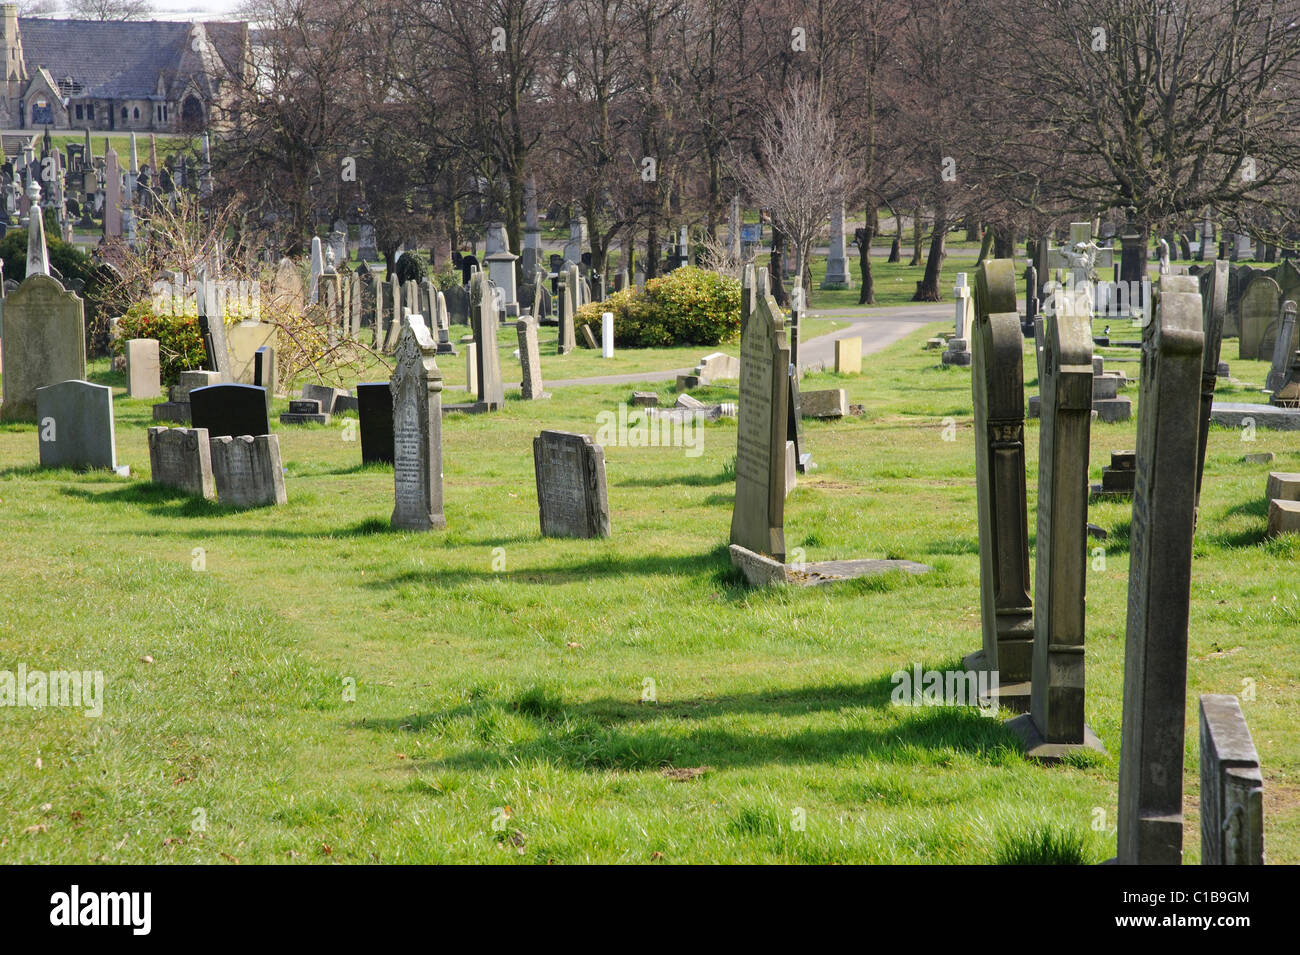 Grave stones in a cemetery. Stock Photo